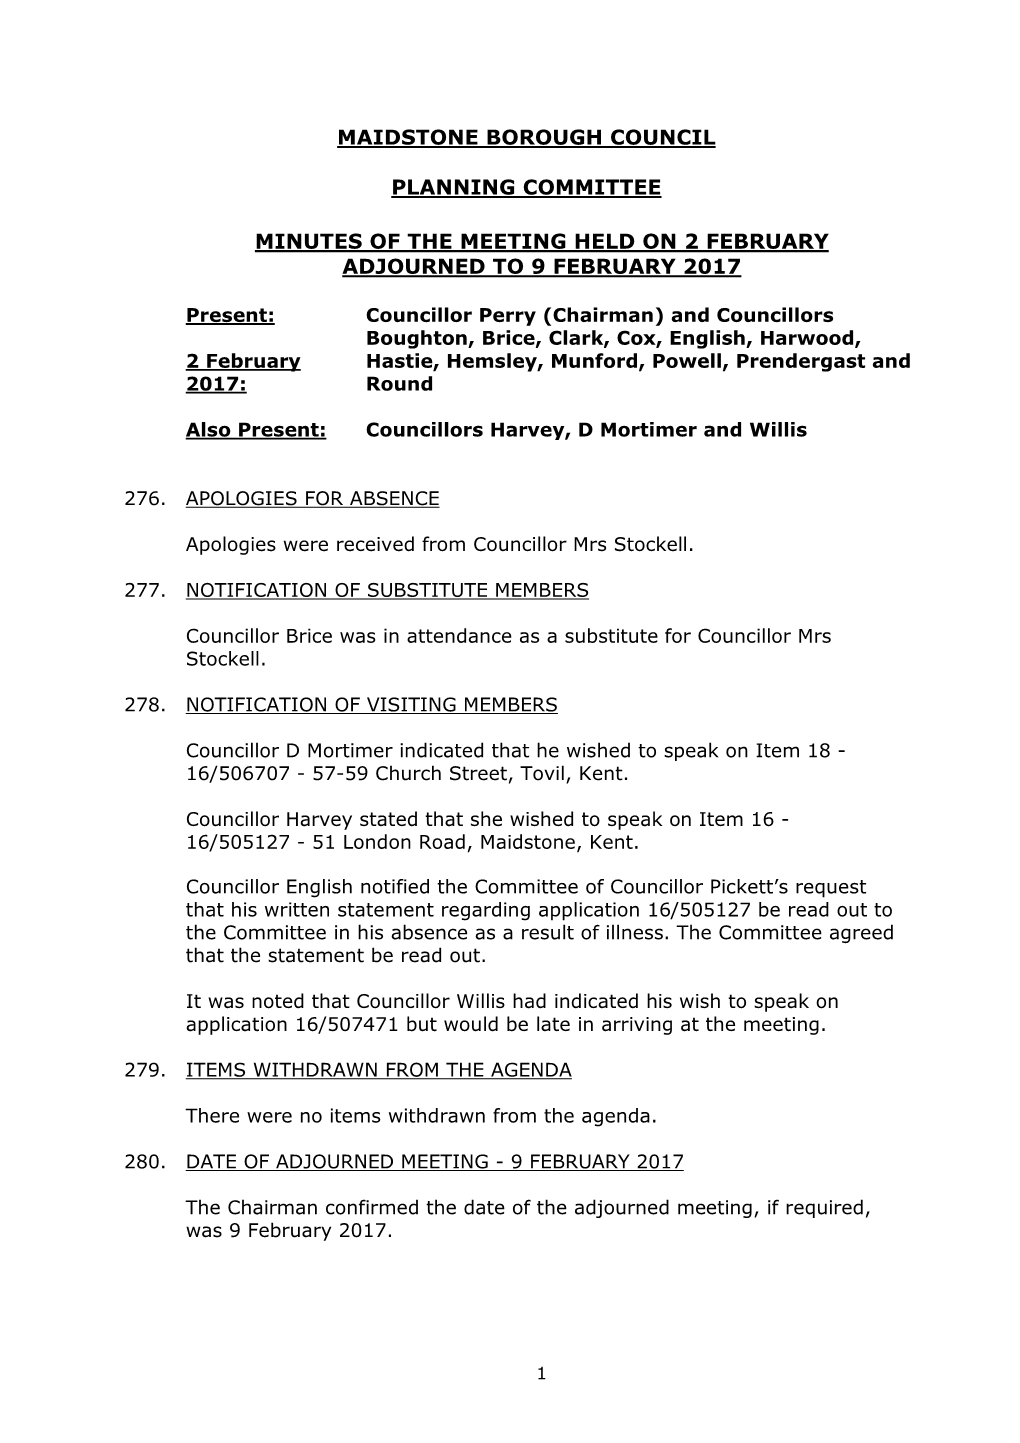 Maidstone Borough Council Planning Committee Minutes of the Meeting Held on 2 February Adjourned to 9 February 2017